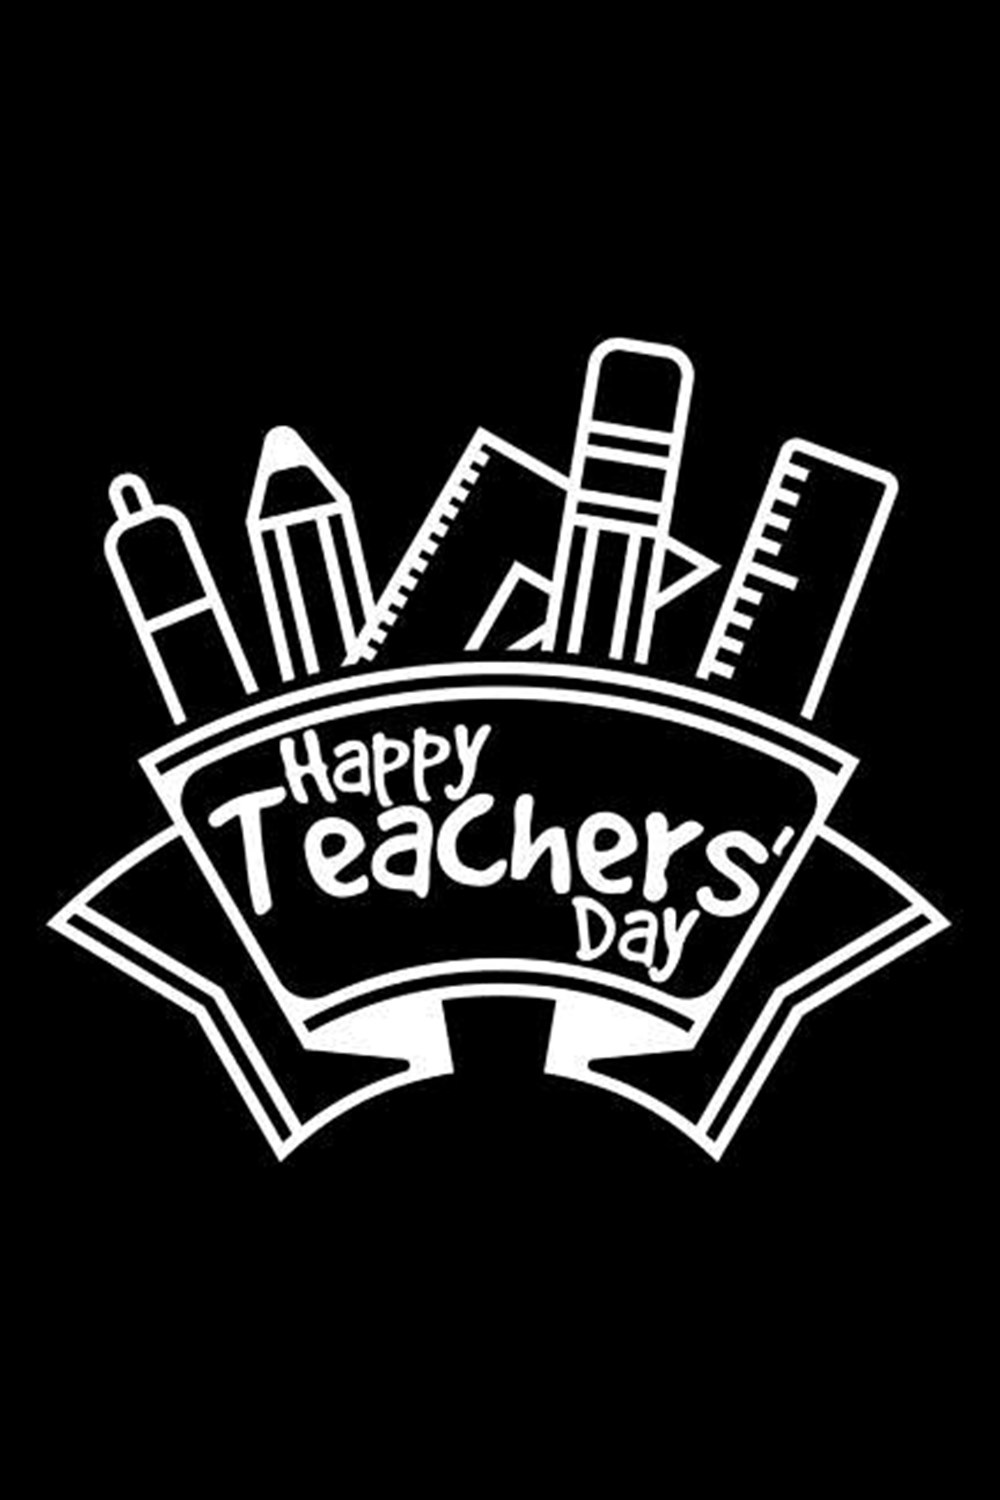 Happy Teachers Day Blank Paper Sketch Book - Artist Sketch Pad Journal for Sketching, Doodling, Draw